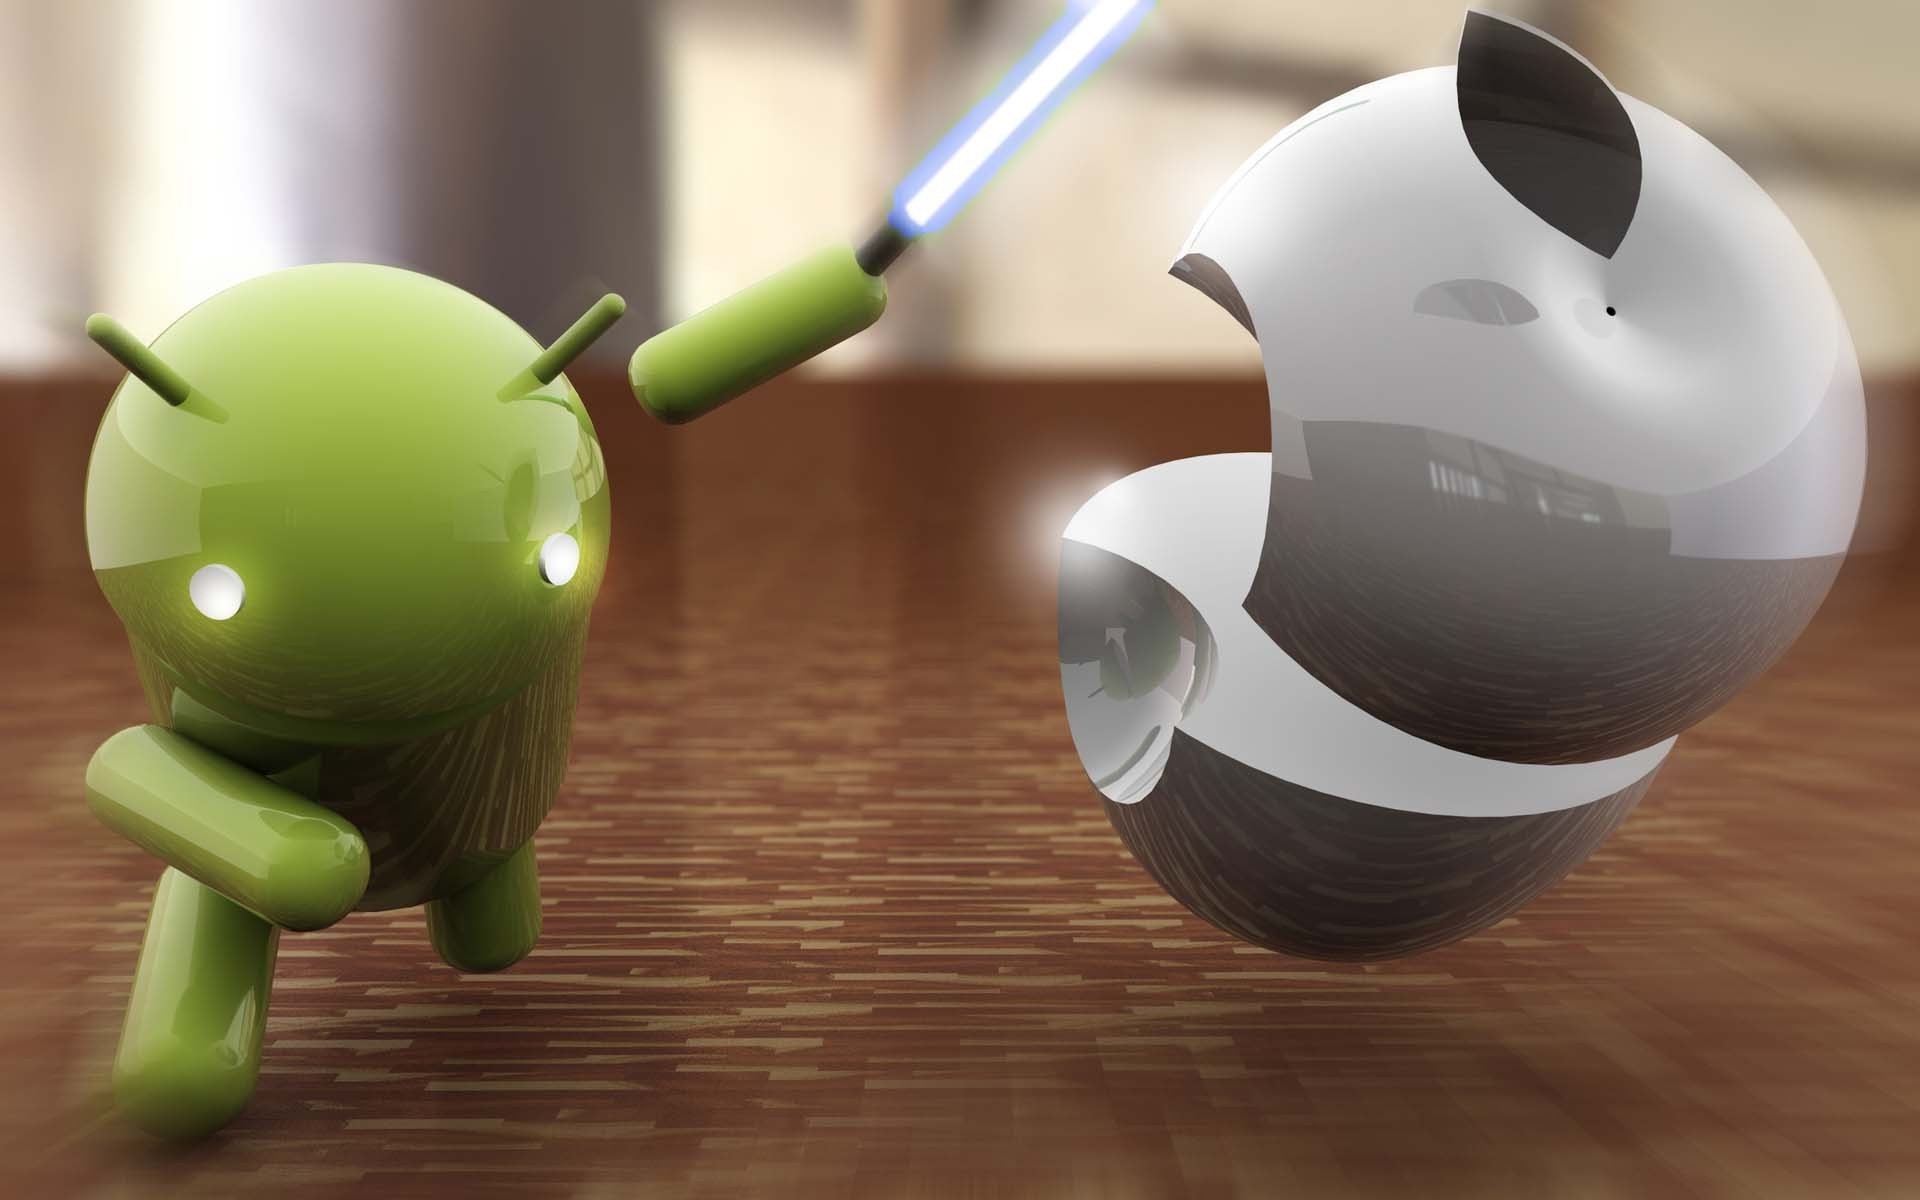 technology, Apple Inc., Android (operating System), Star Wars, Sword, Laser, Humor Wallpaper